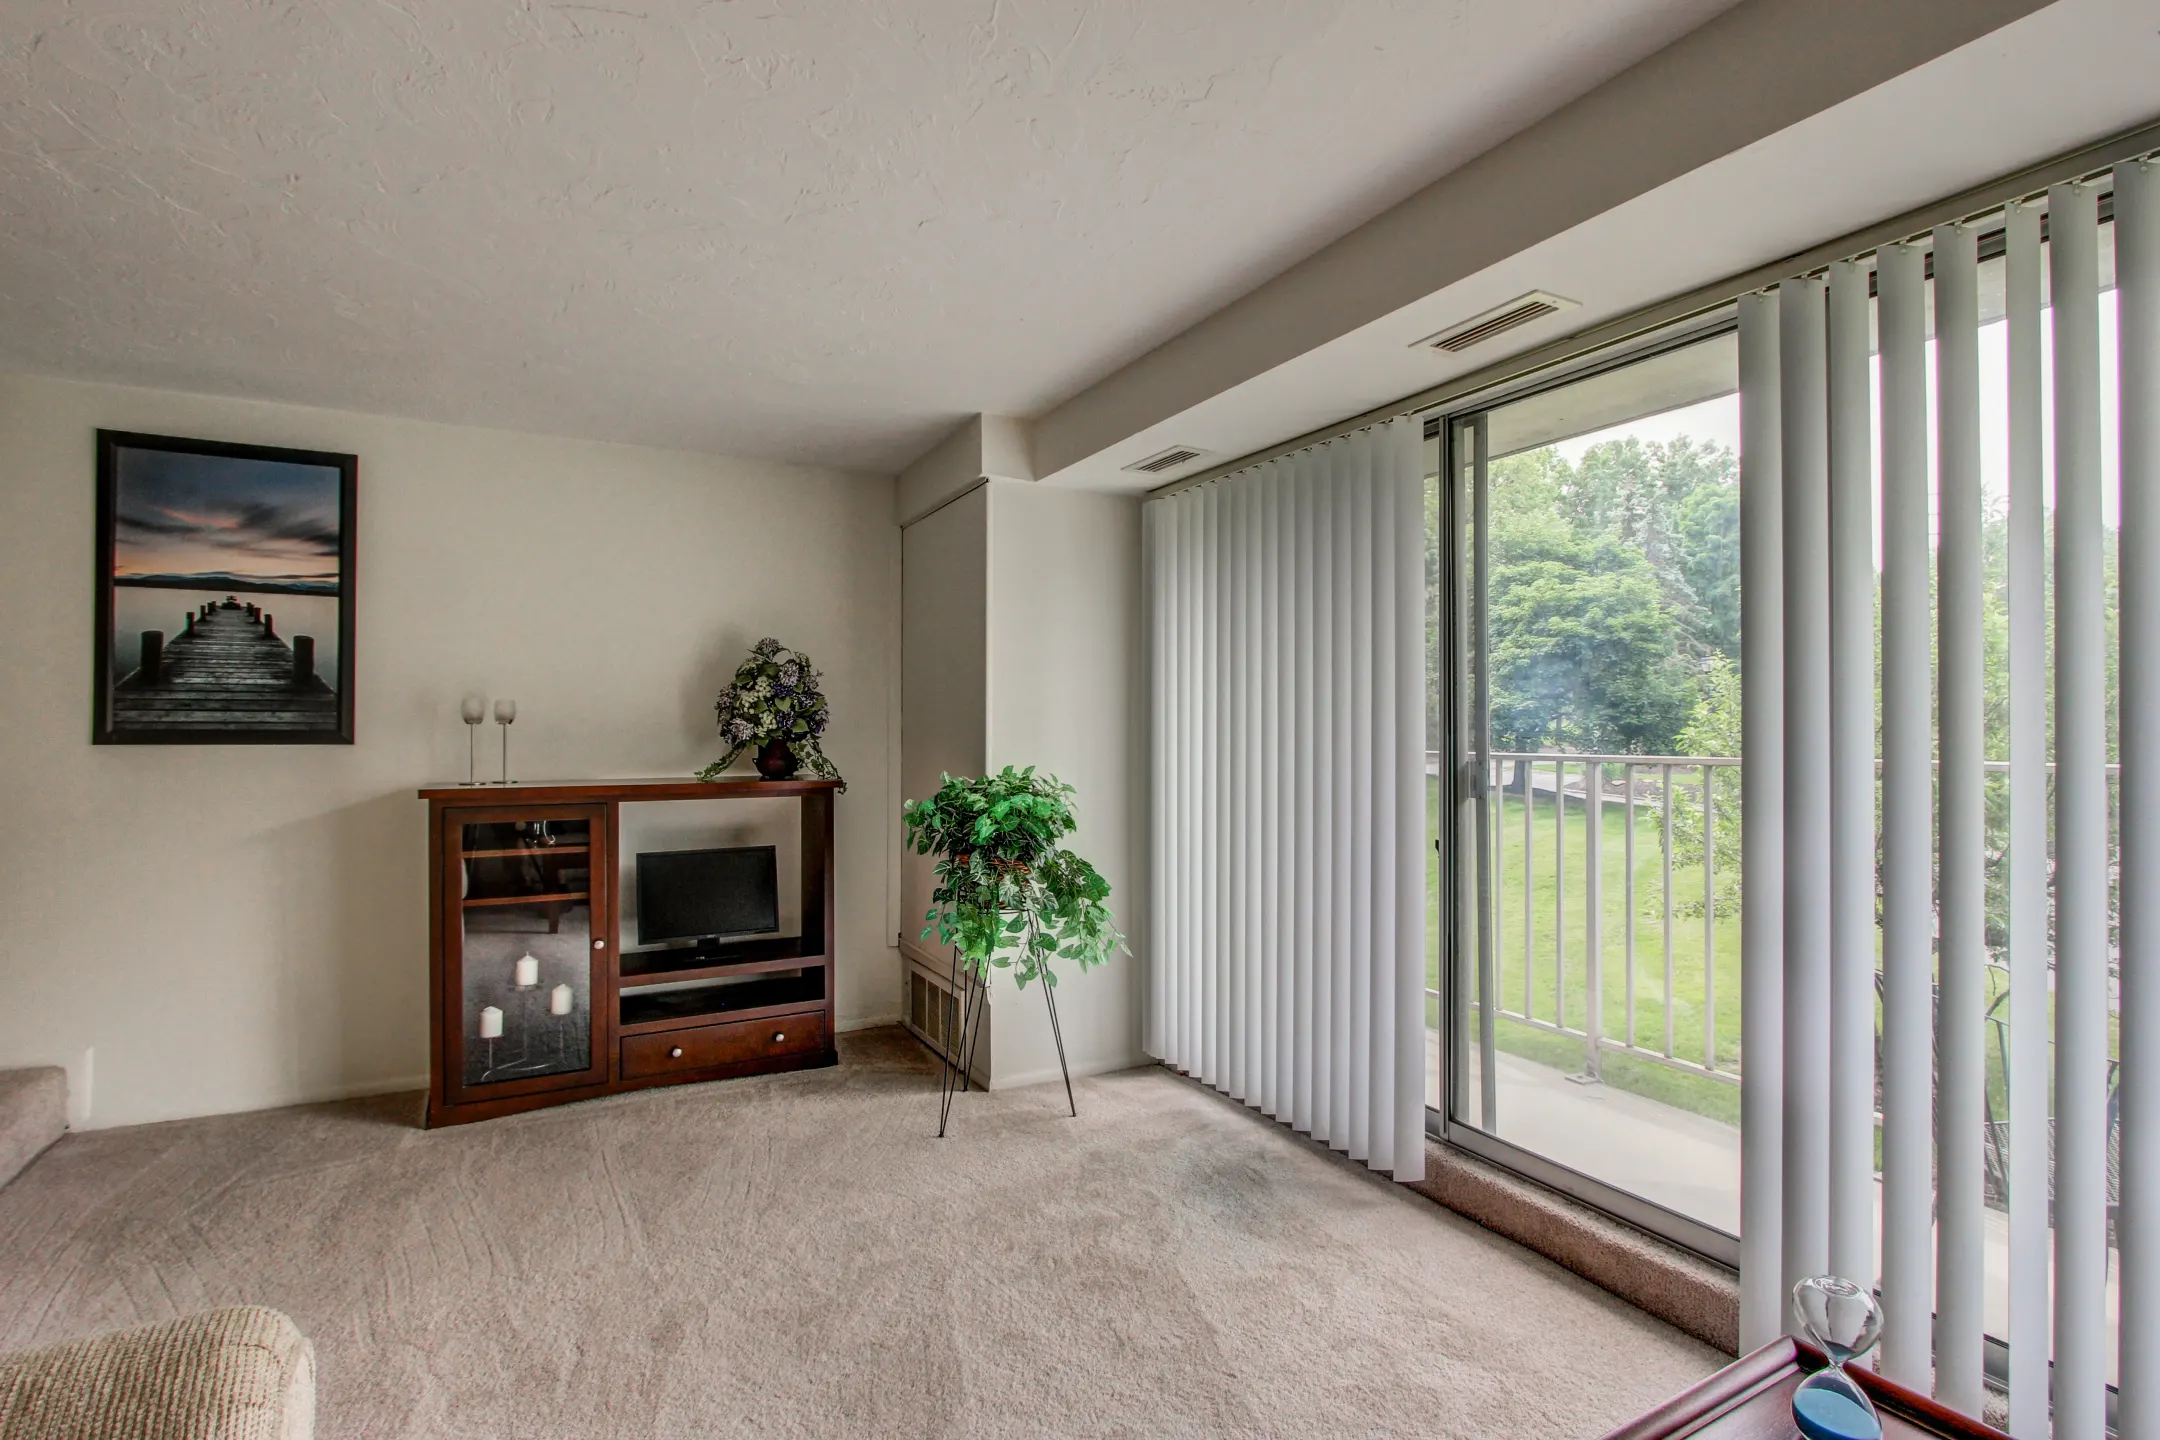 Living Room - Portage Towers - Cuyahoga Falls, OH